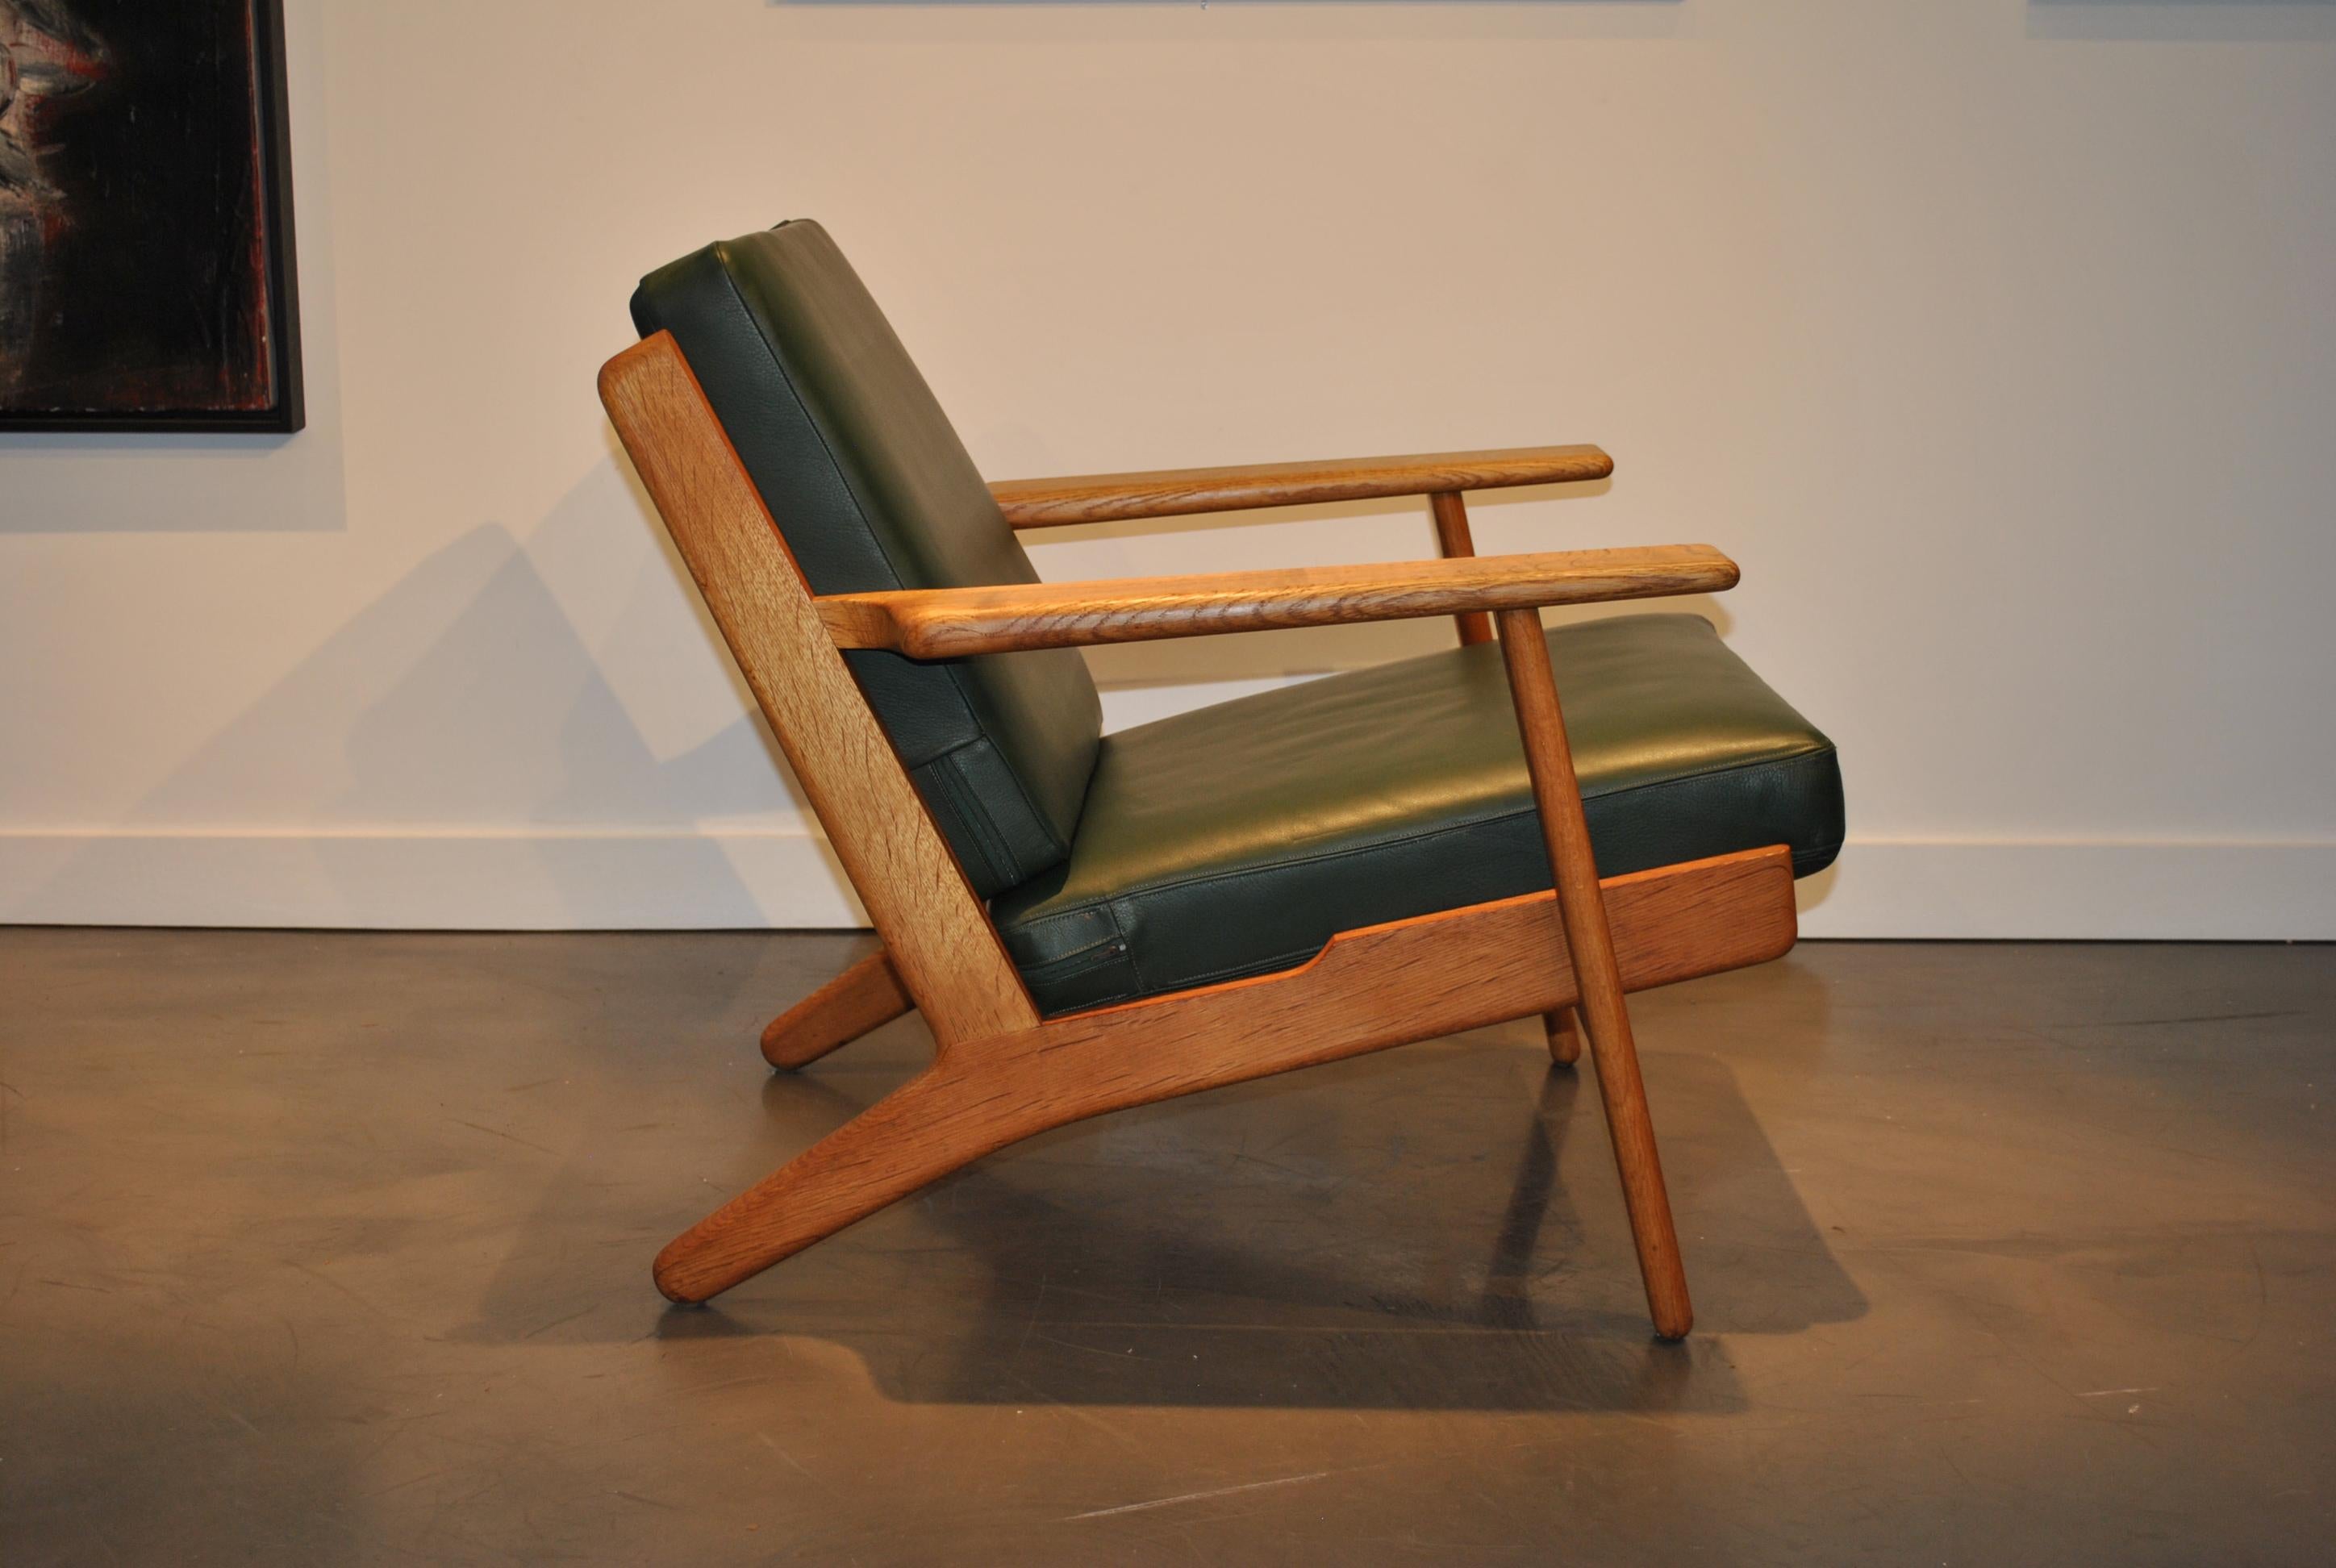 The Classic GE290 lounge chair by Danish master designer Hans J Wegner. These are original 1950s models (several available) from GETAMA, Denmark. Sympathetically refurbished European oak frames with this particular one in dark green leather